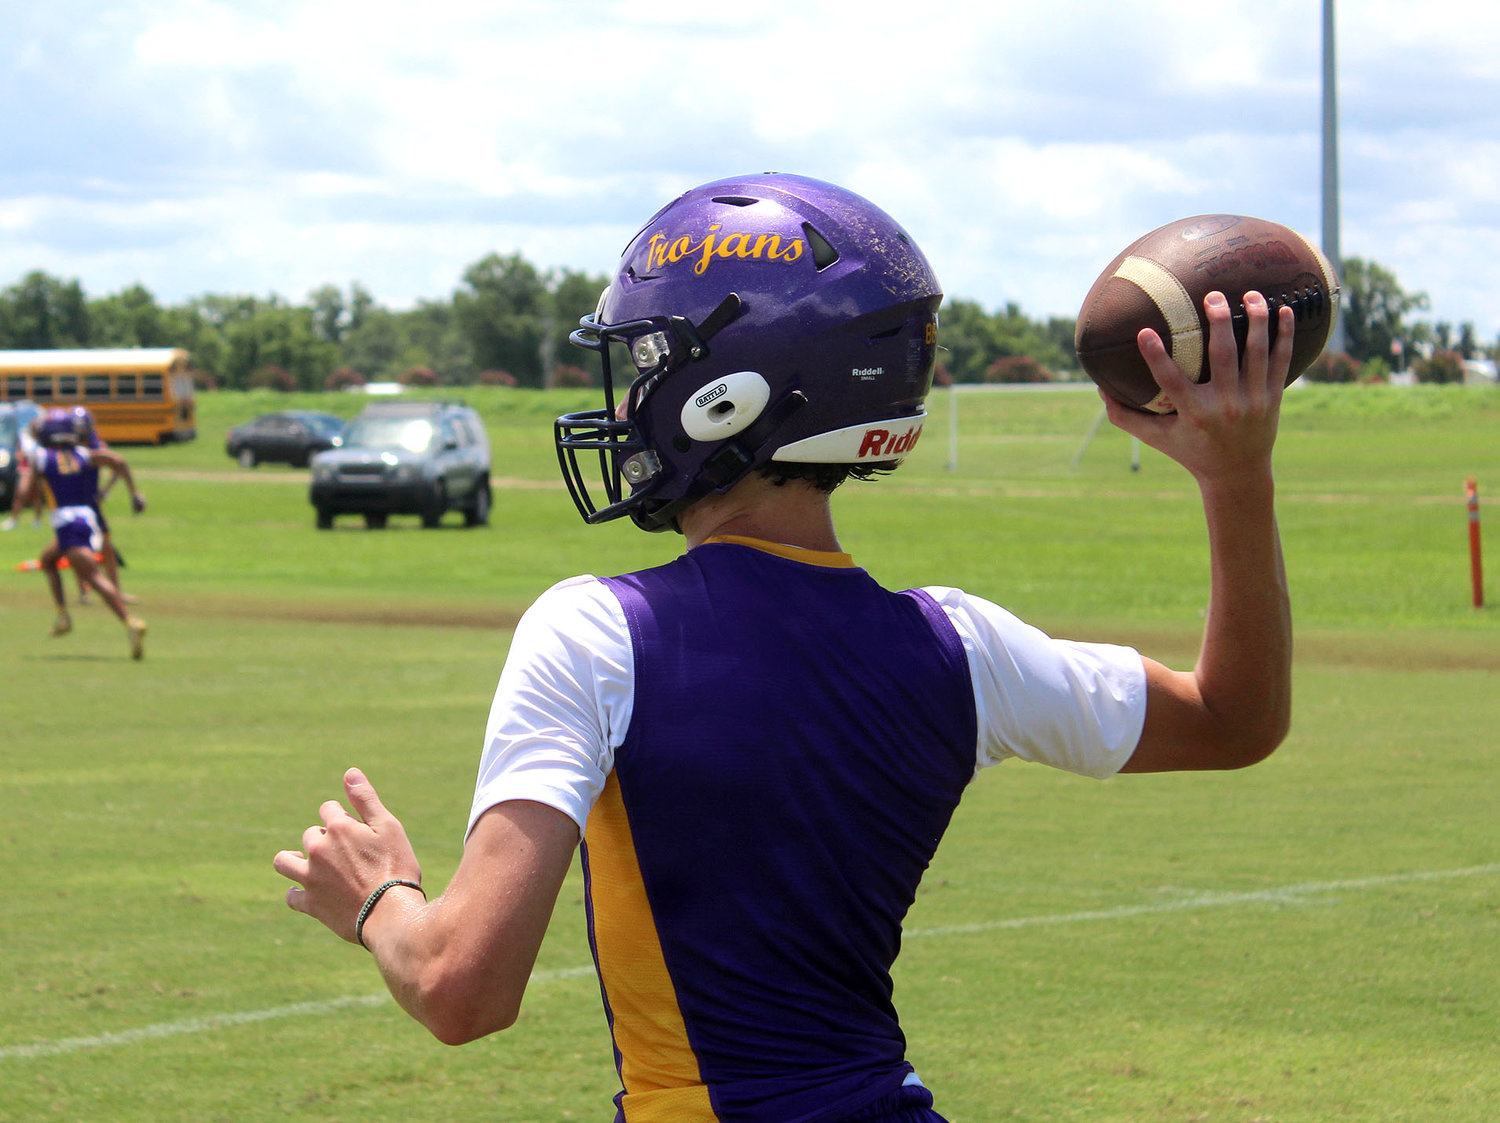 The Daphne Trojans hosted the annual Jubilee City 7-on-7 and Big Man Tournament at the Al Trione Sports Complex last Thursday, July 14.